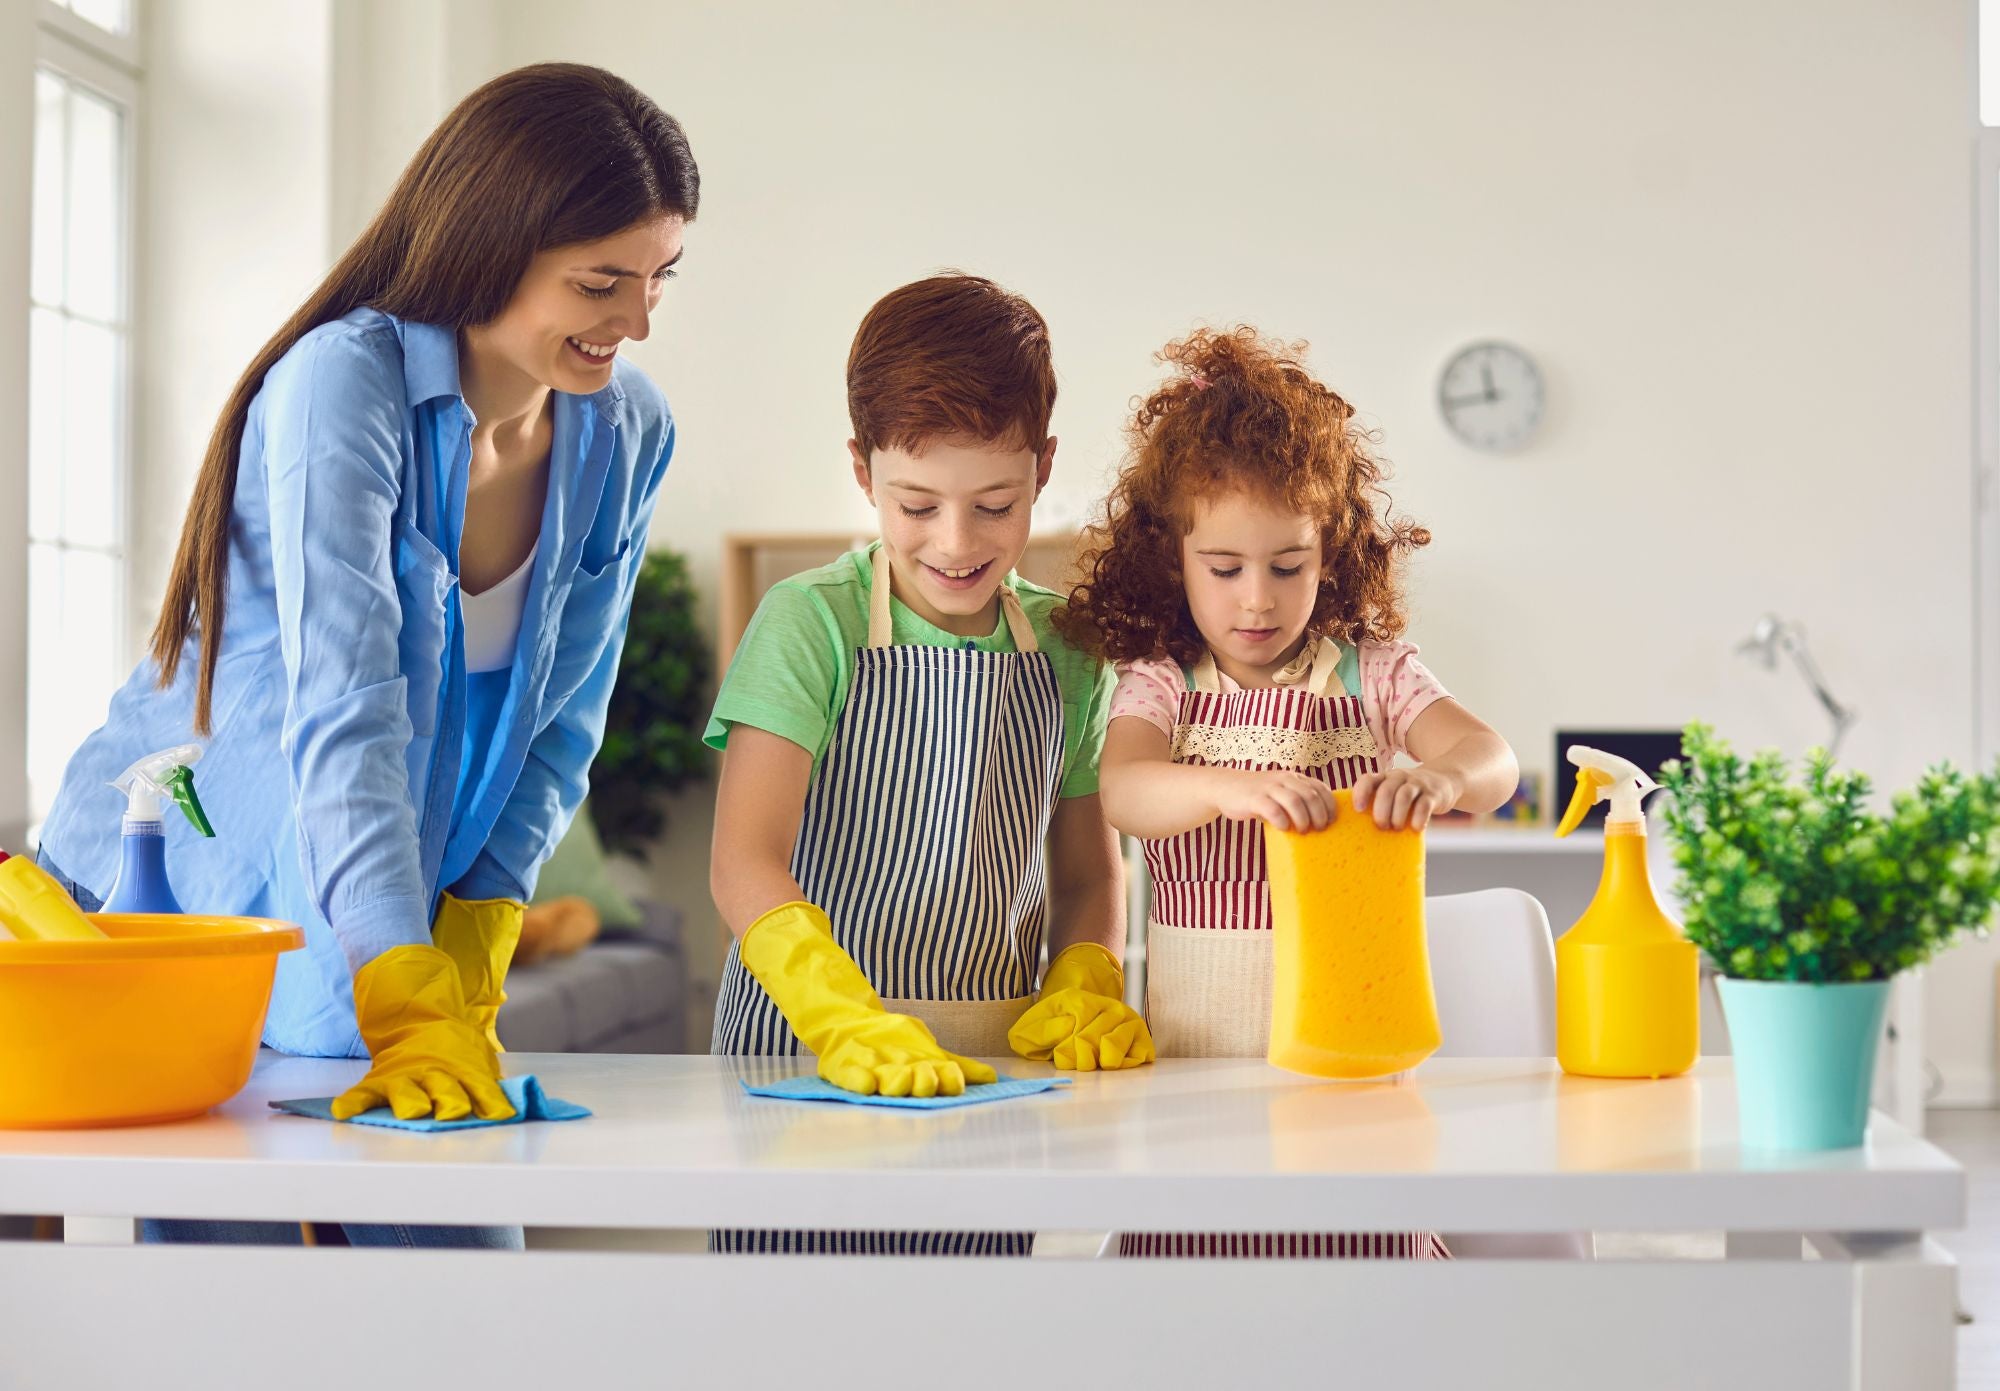 Spring Cleaning with a Twist: Creative Ways to Involve Your Kids